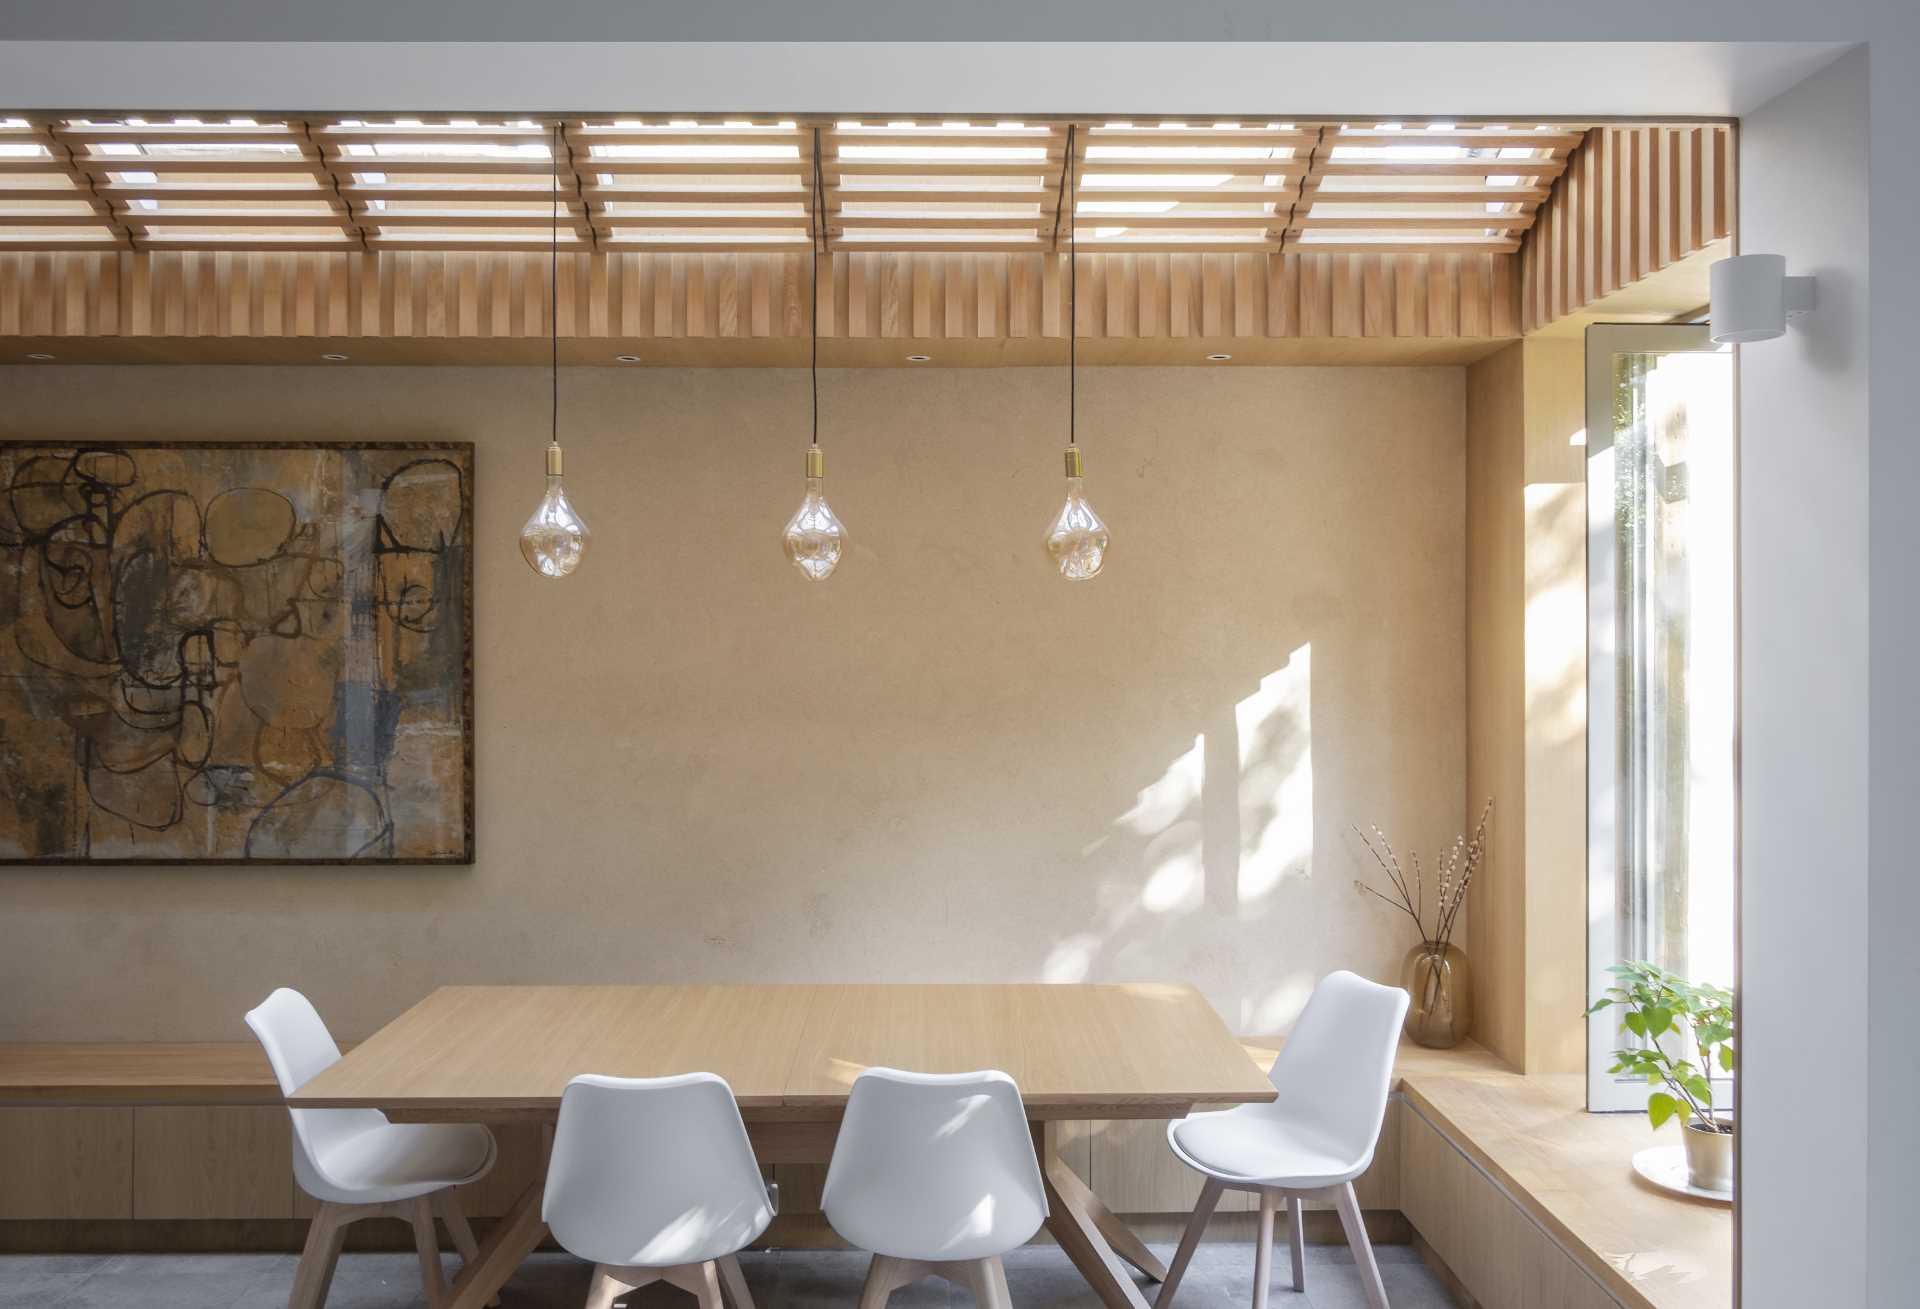 To avoid this modern dining room being overlooked by the neighbors' upper windows, the architects designed a series of louvres made of oak to line the underside of the roof.